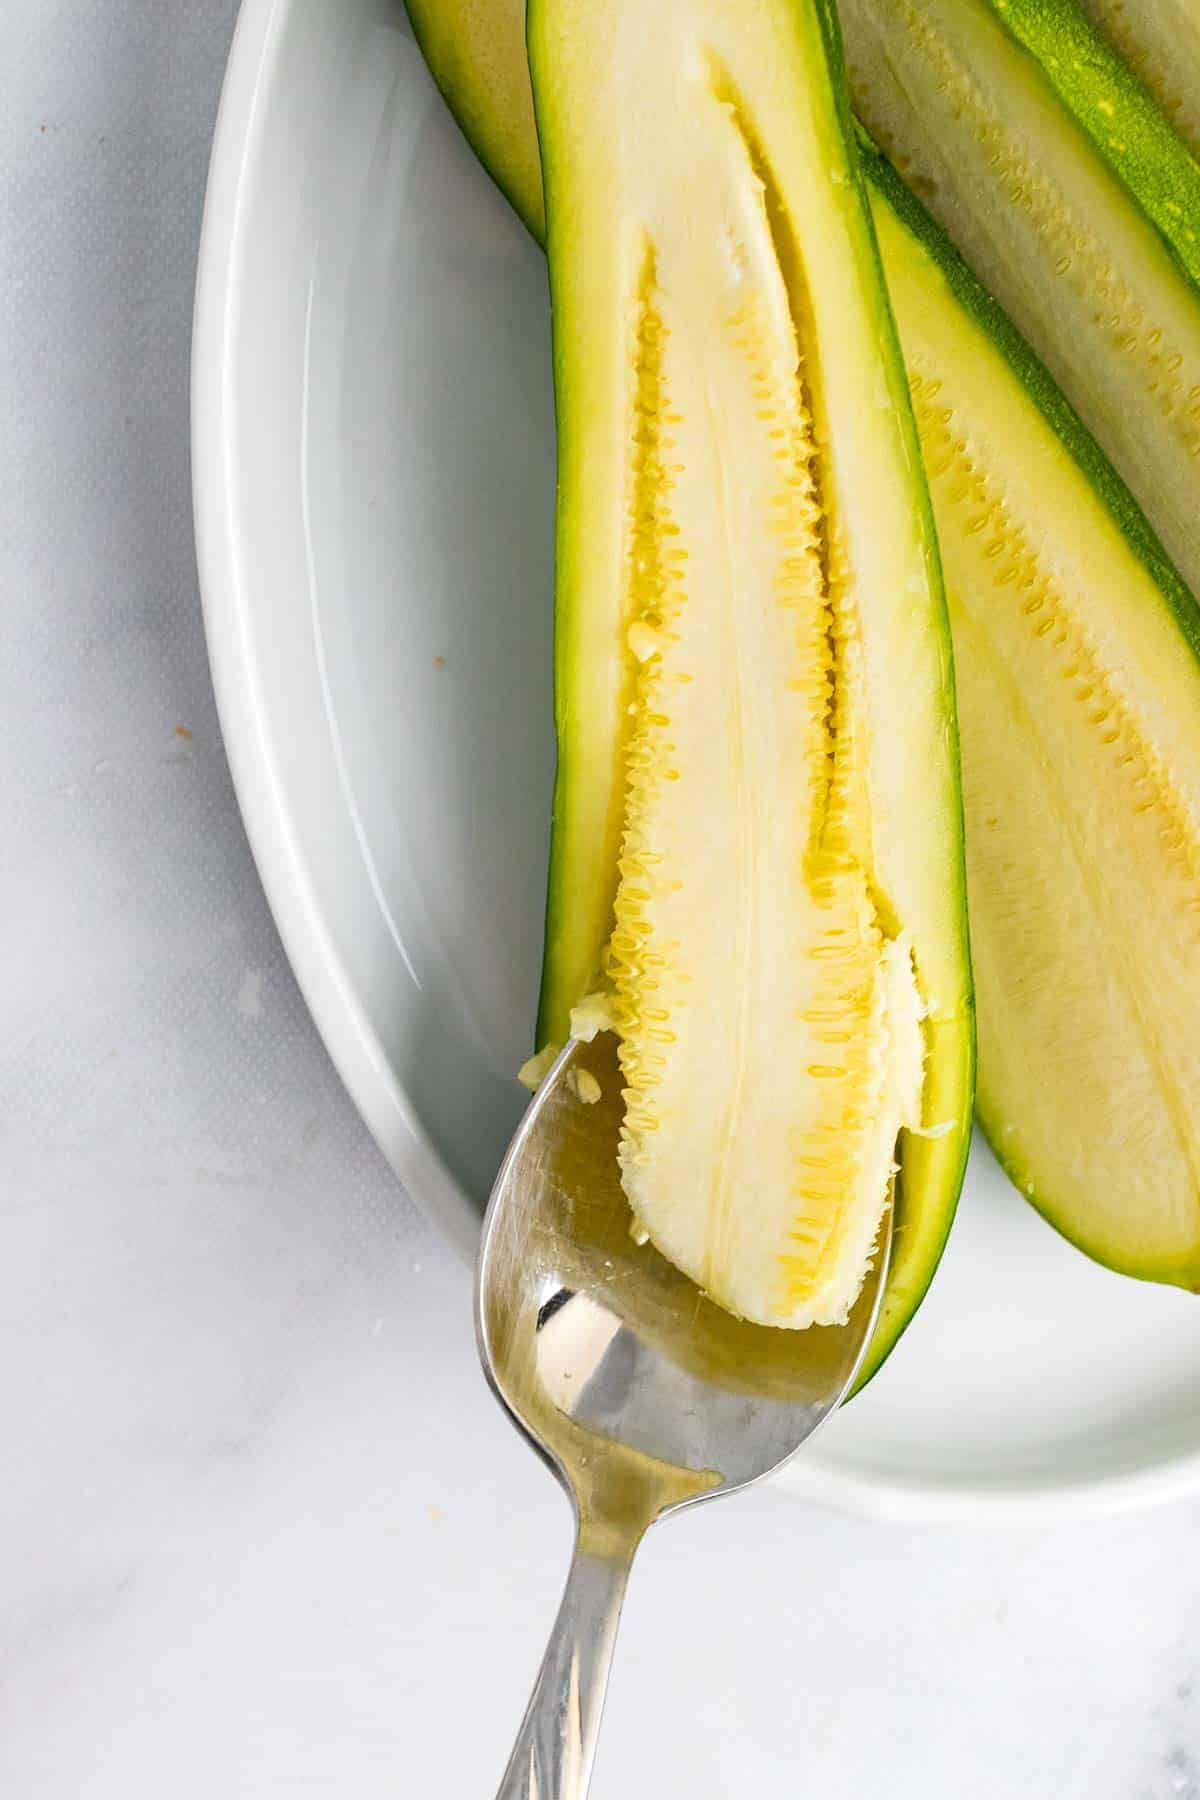 Using a spoon to scoop the flesh from the inside of the zucchini half